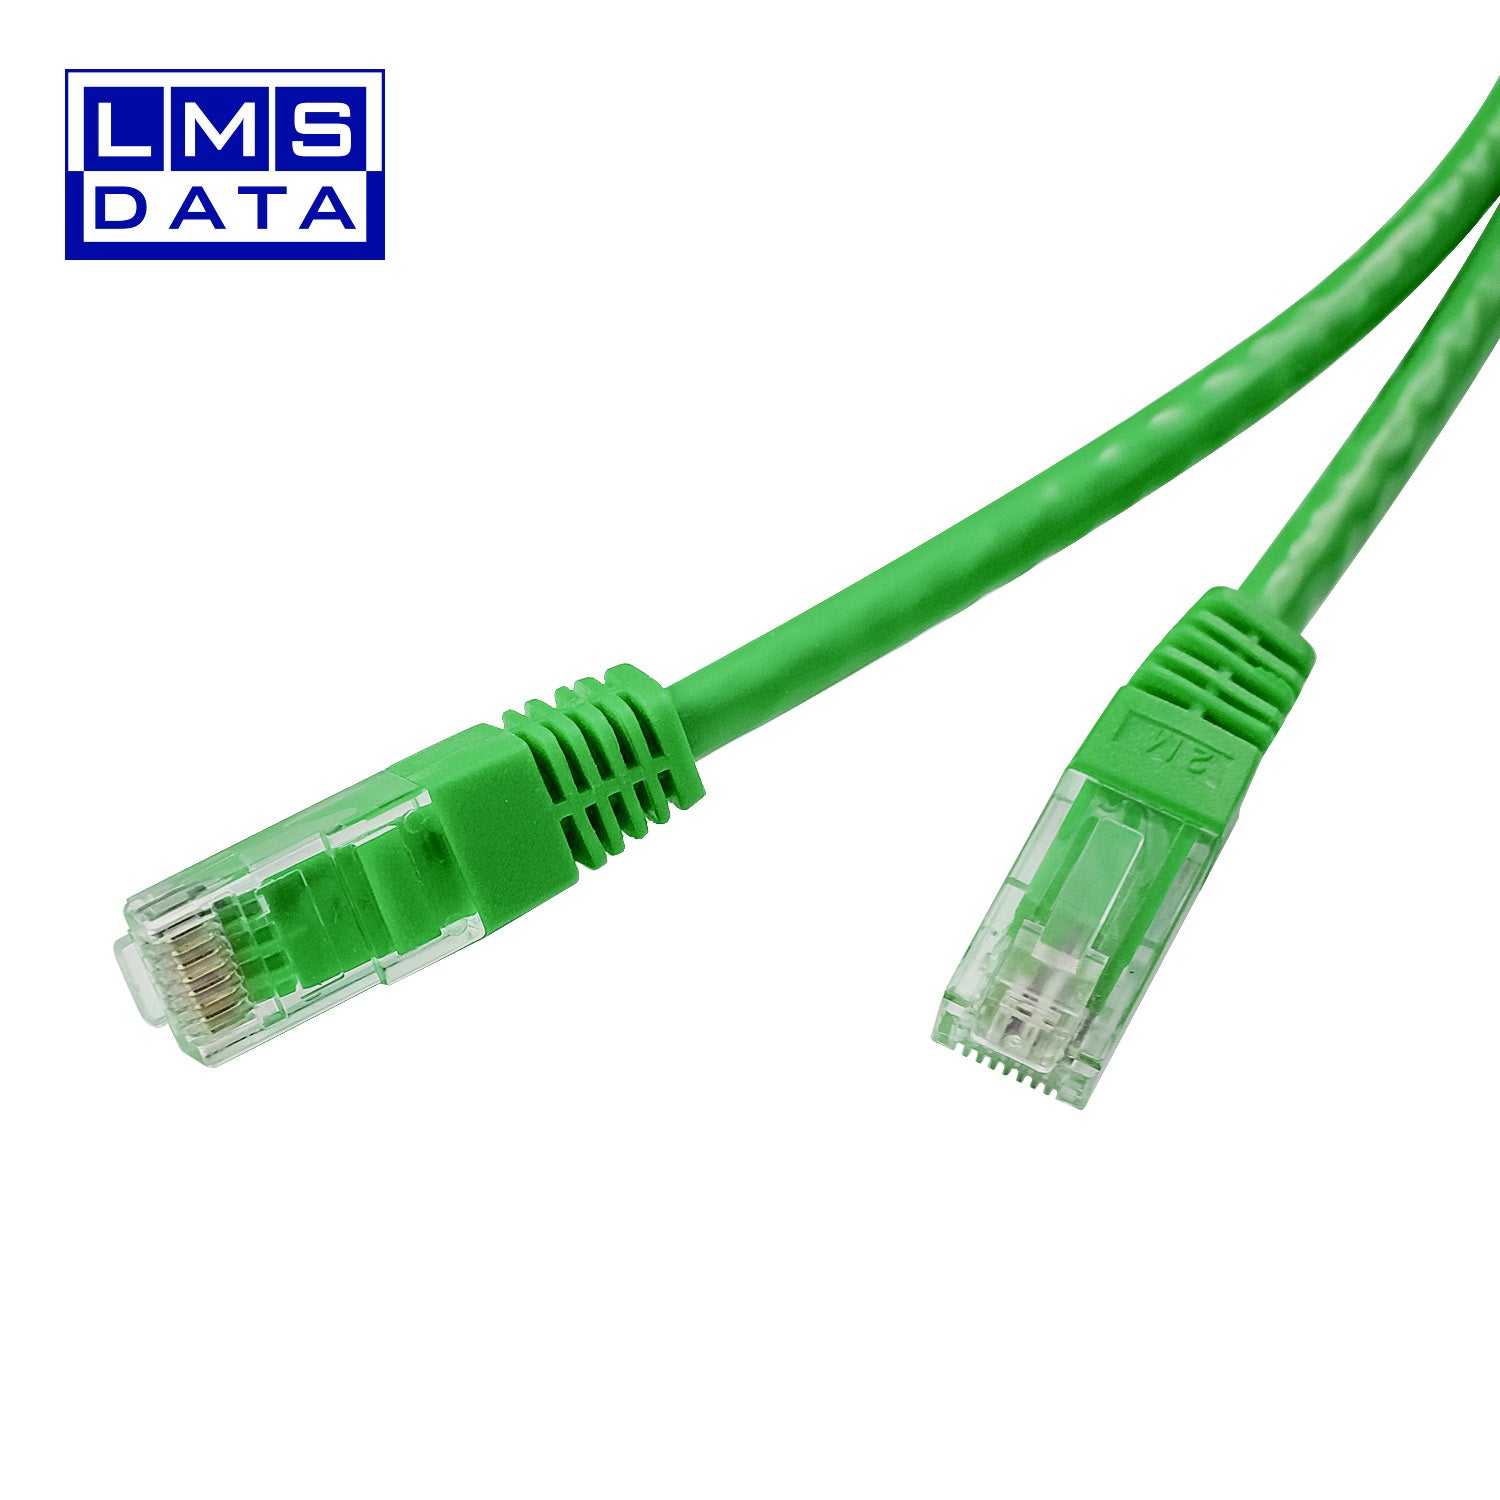 2m patch cord green